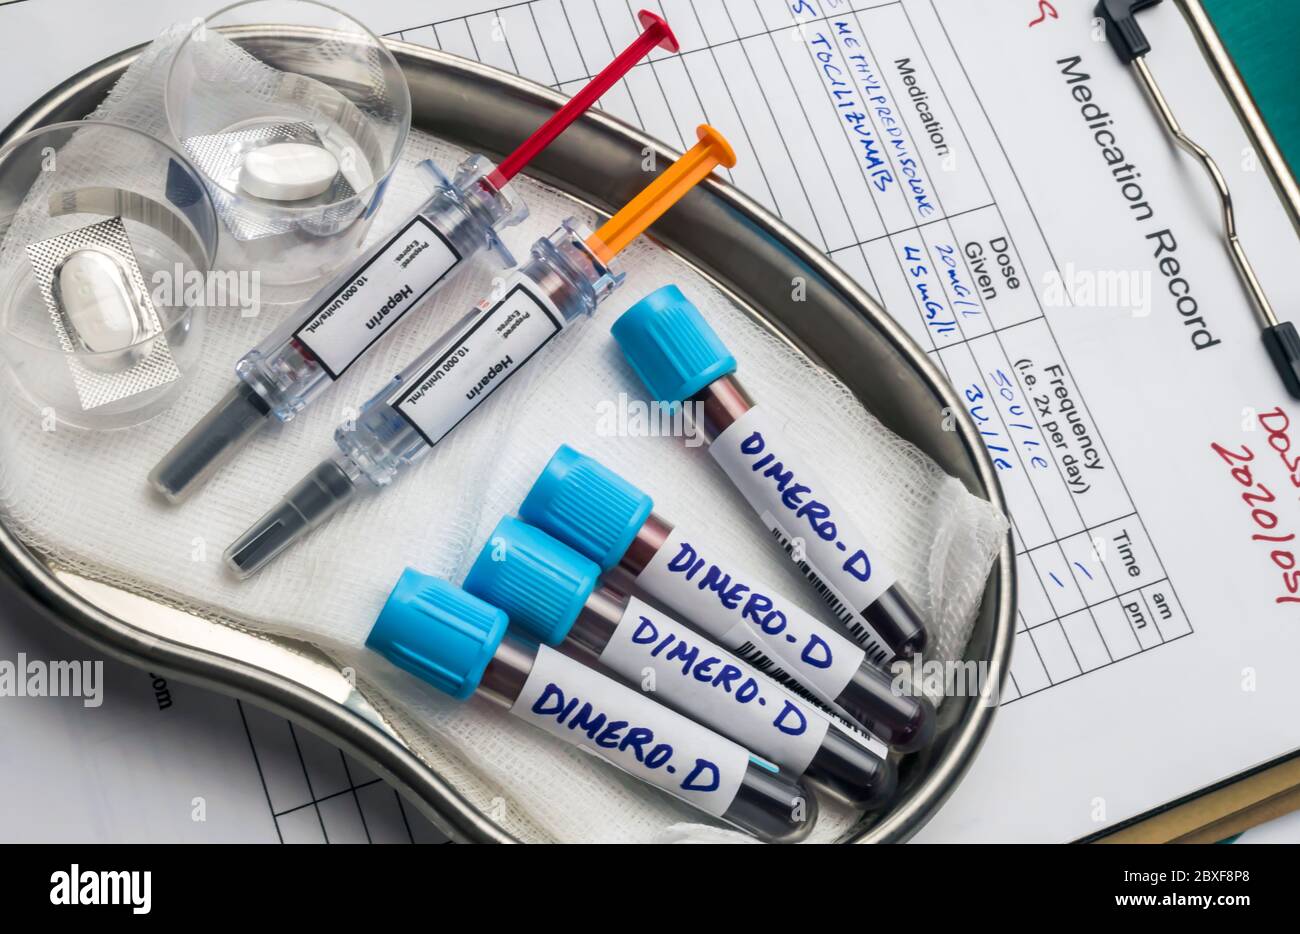 heparin medication for covid-19 patients with elevated blood dimero-D, conceptual image, unbranded generic drug containers Stock Photo